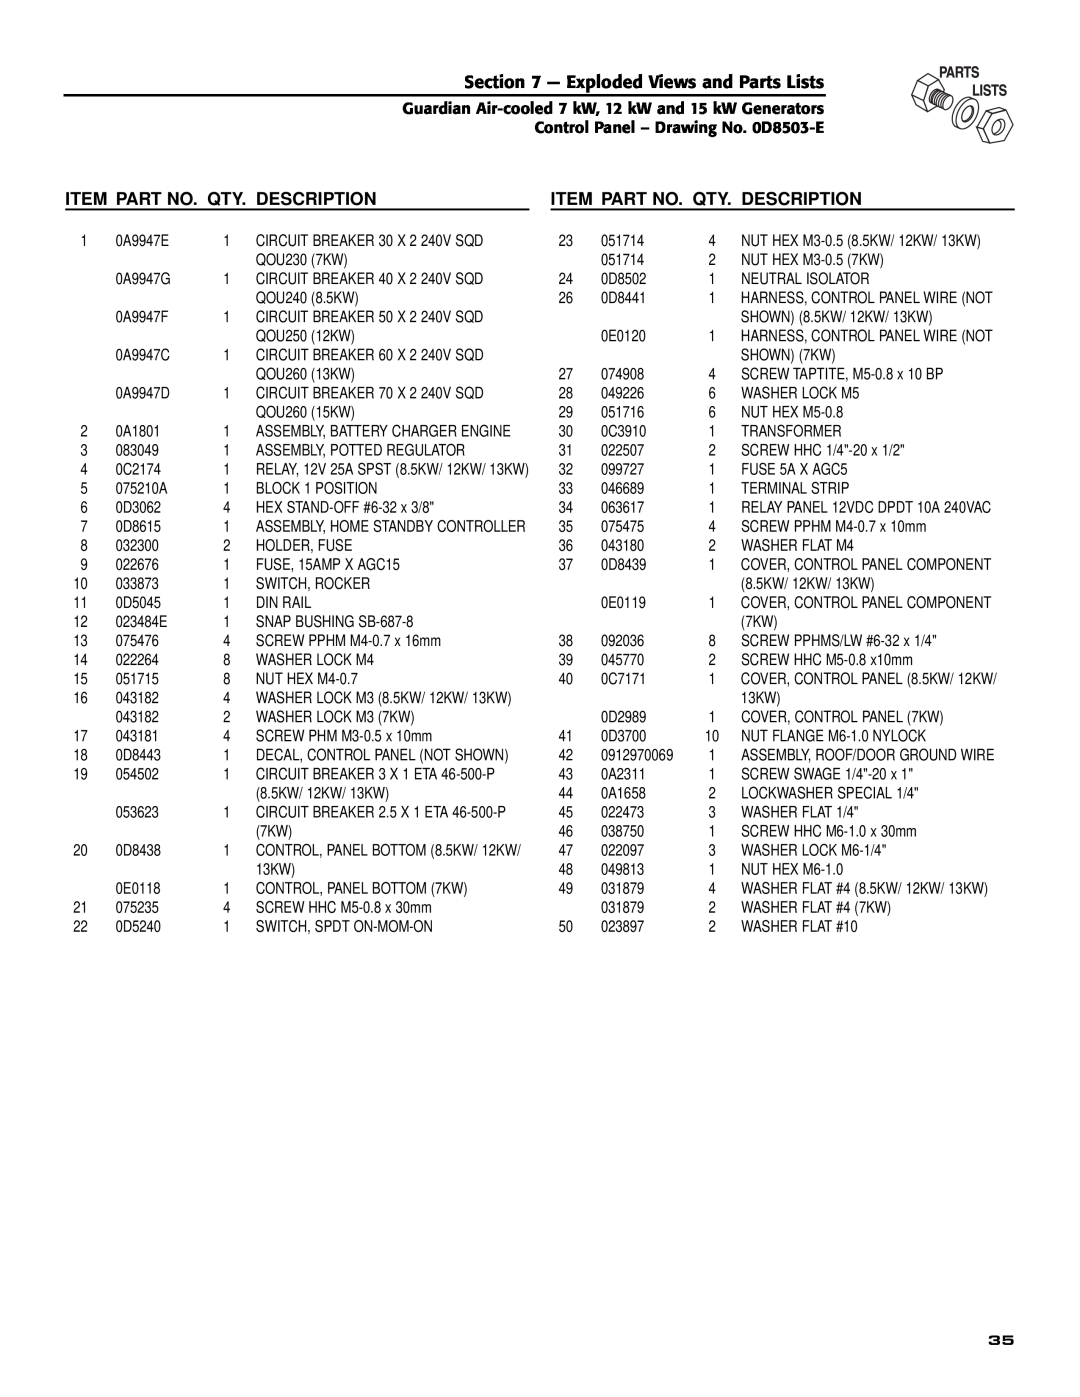 Generac Power Systems 04759-0, 04758-0, 04760-0 owner manual Exploded Views and Parts Lists, Part No. Qty. Description 